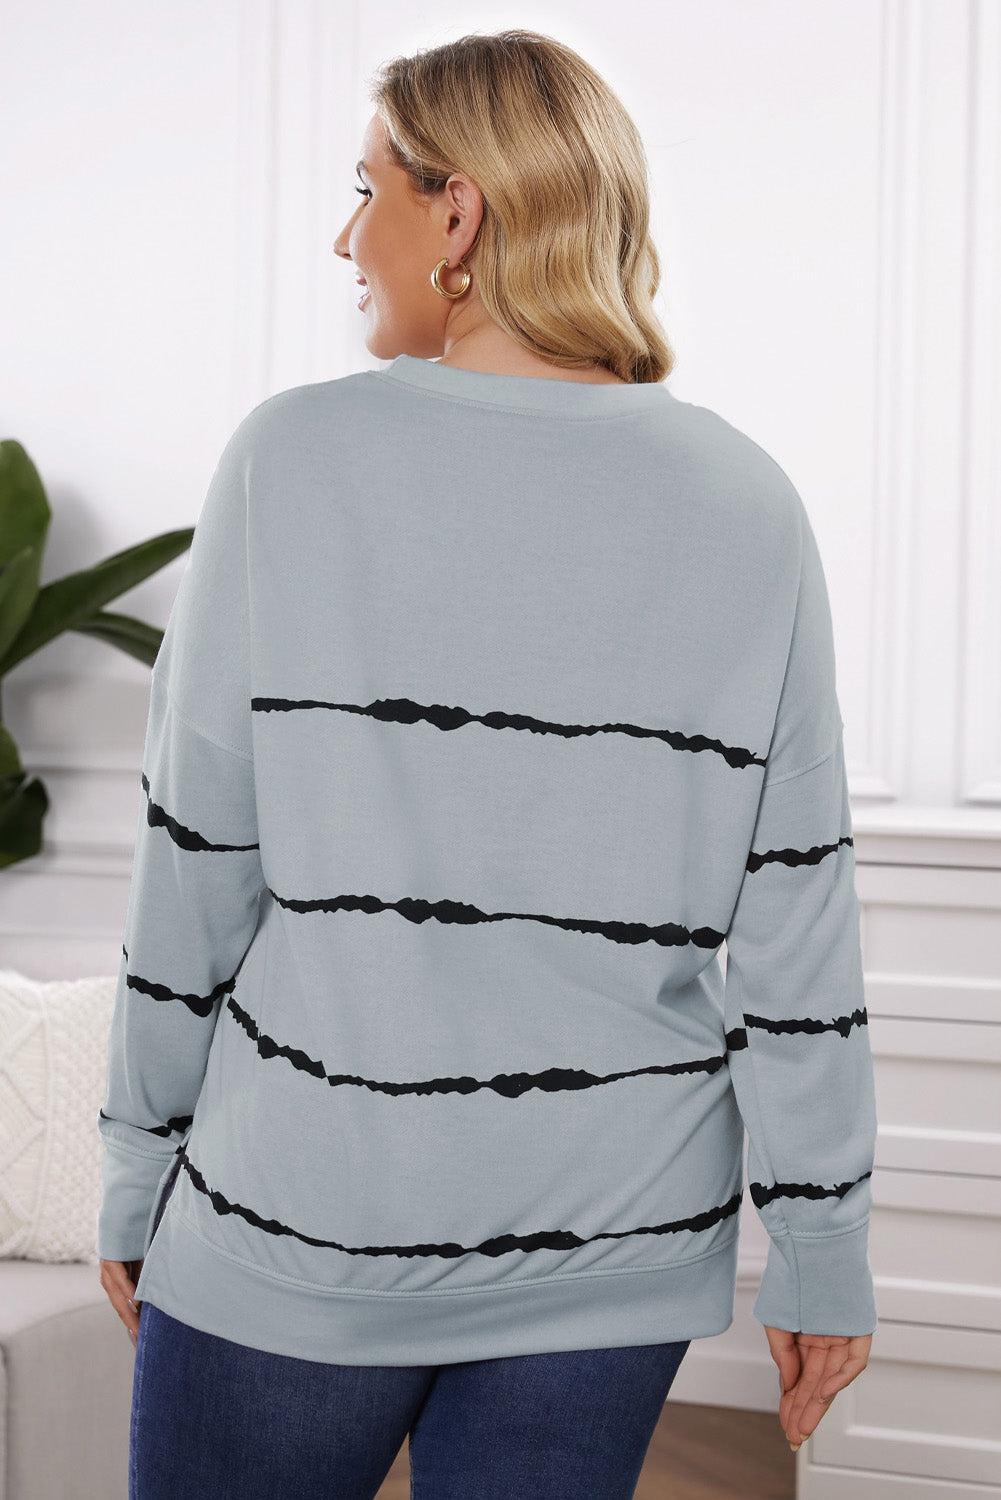 a woman wearing a grey sweater with black stripes